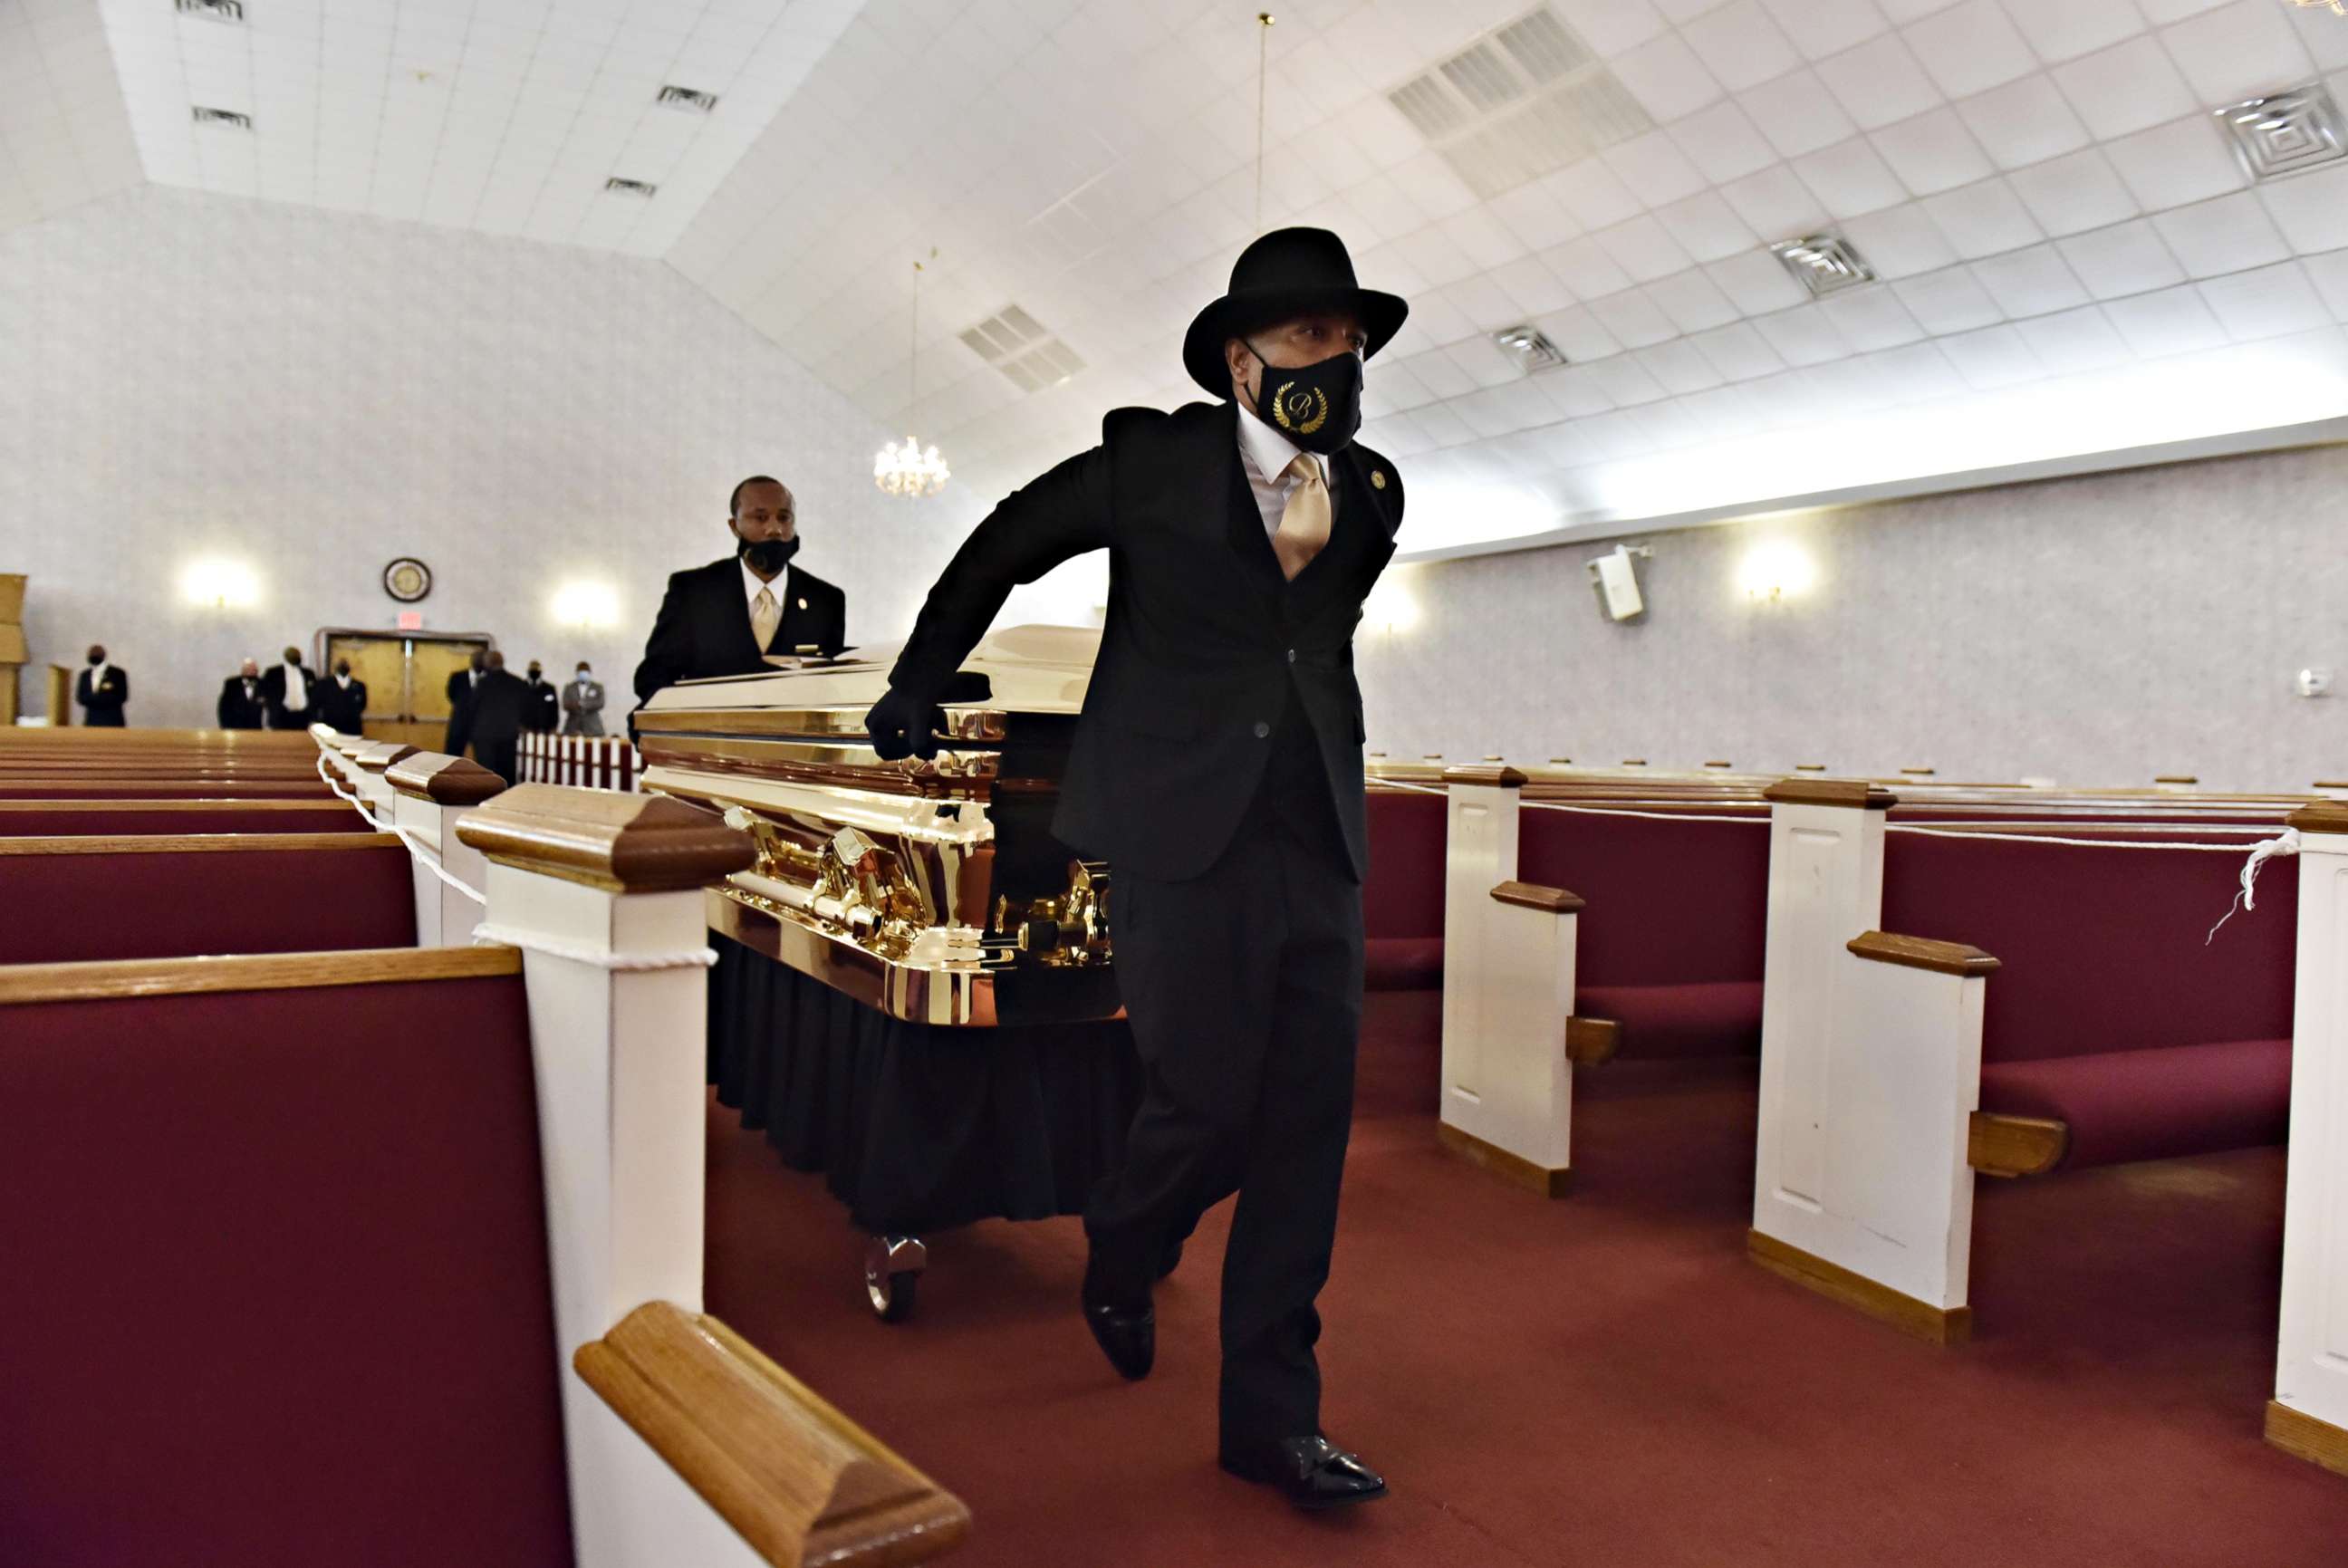 PHOTO: The casket carrying the body of George Floyd is brought inside for his memorial services at R.L Douglas Cape Fear Conference B - The United American Free Will Baptist Denomination in Raeford, North Carolina, June 2020.